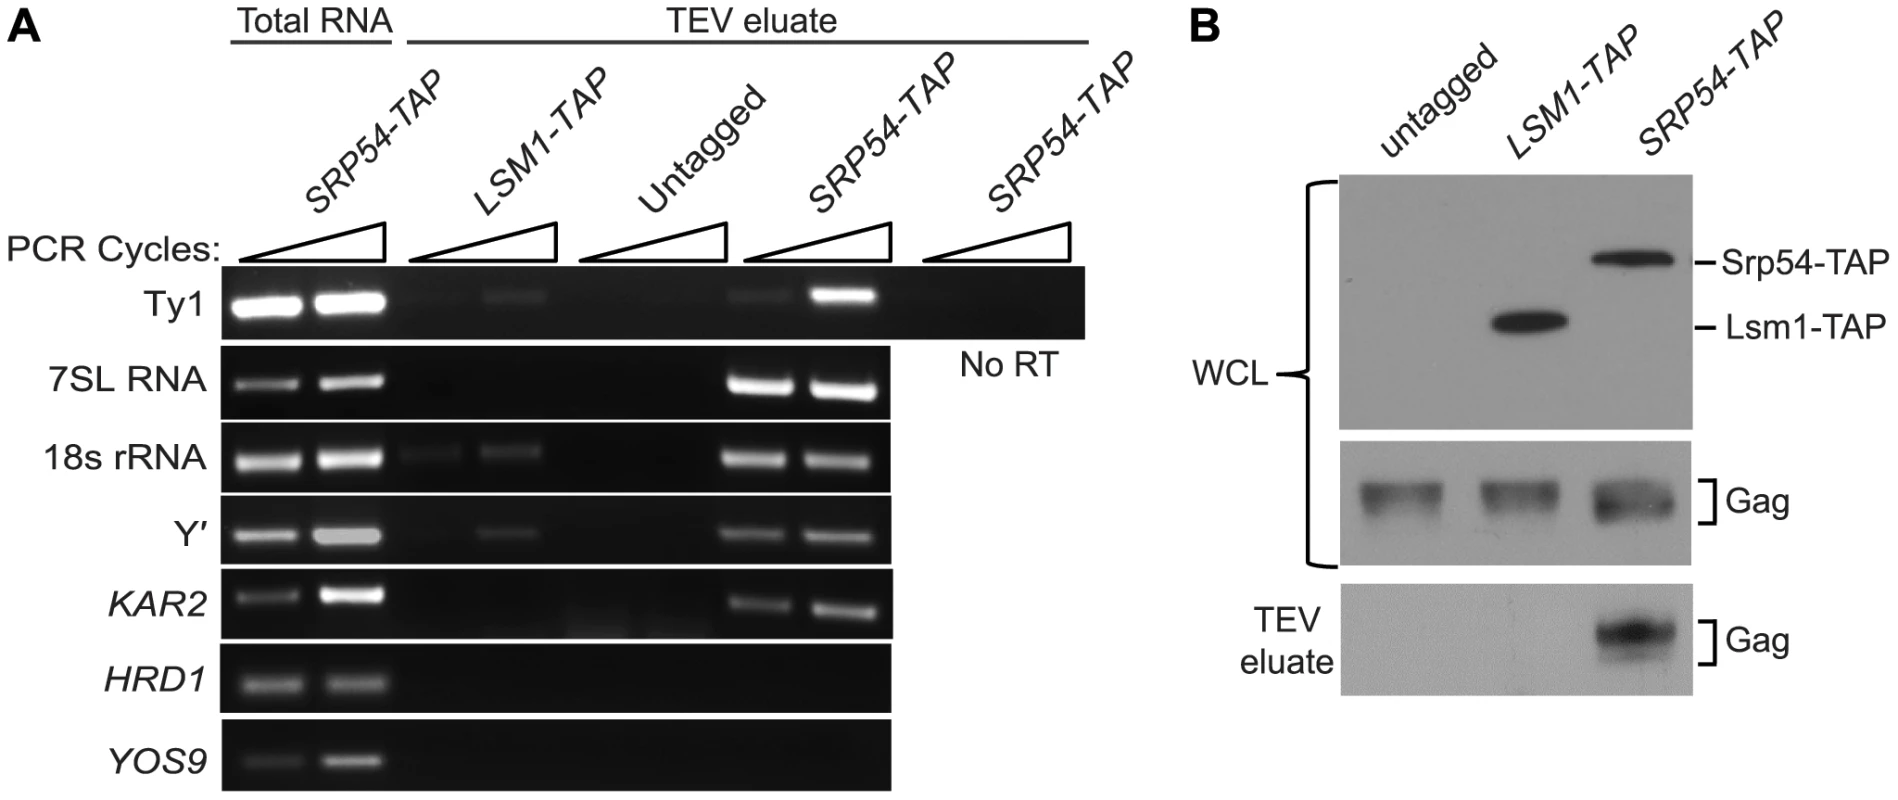 Ty1 RNA and Gag are enriched in affinity-purified SRP-RNC complexes.